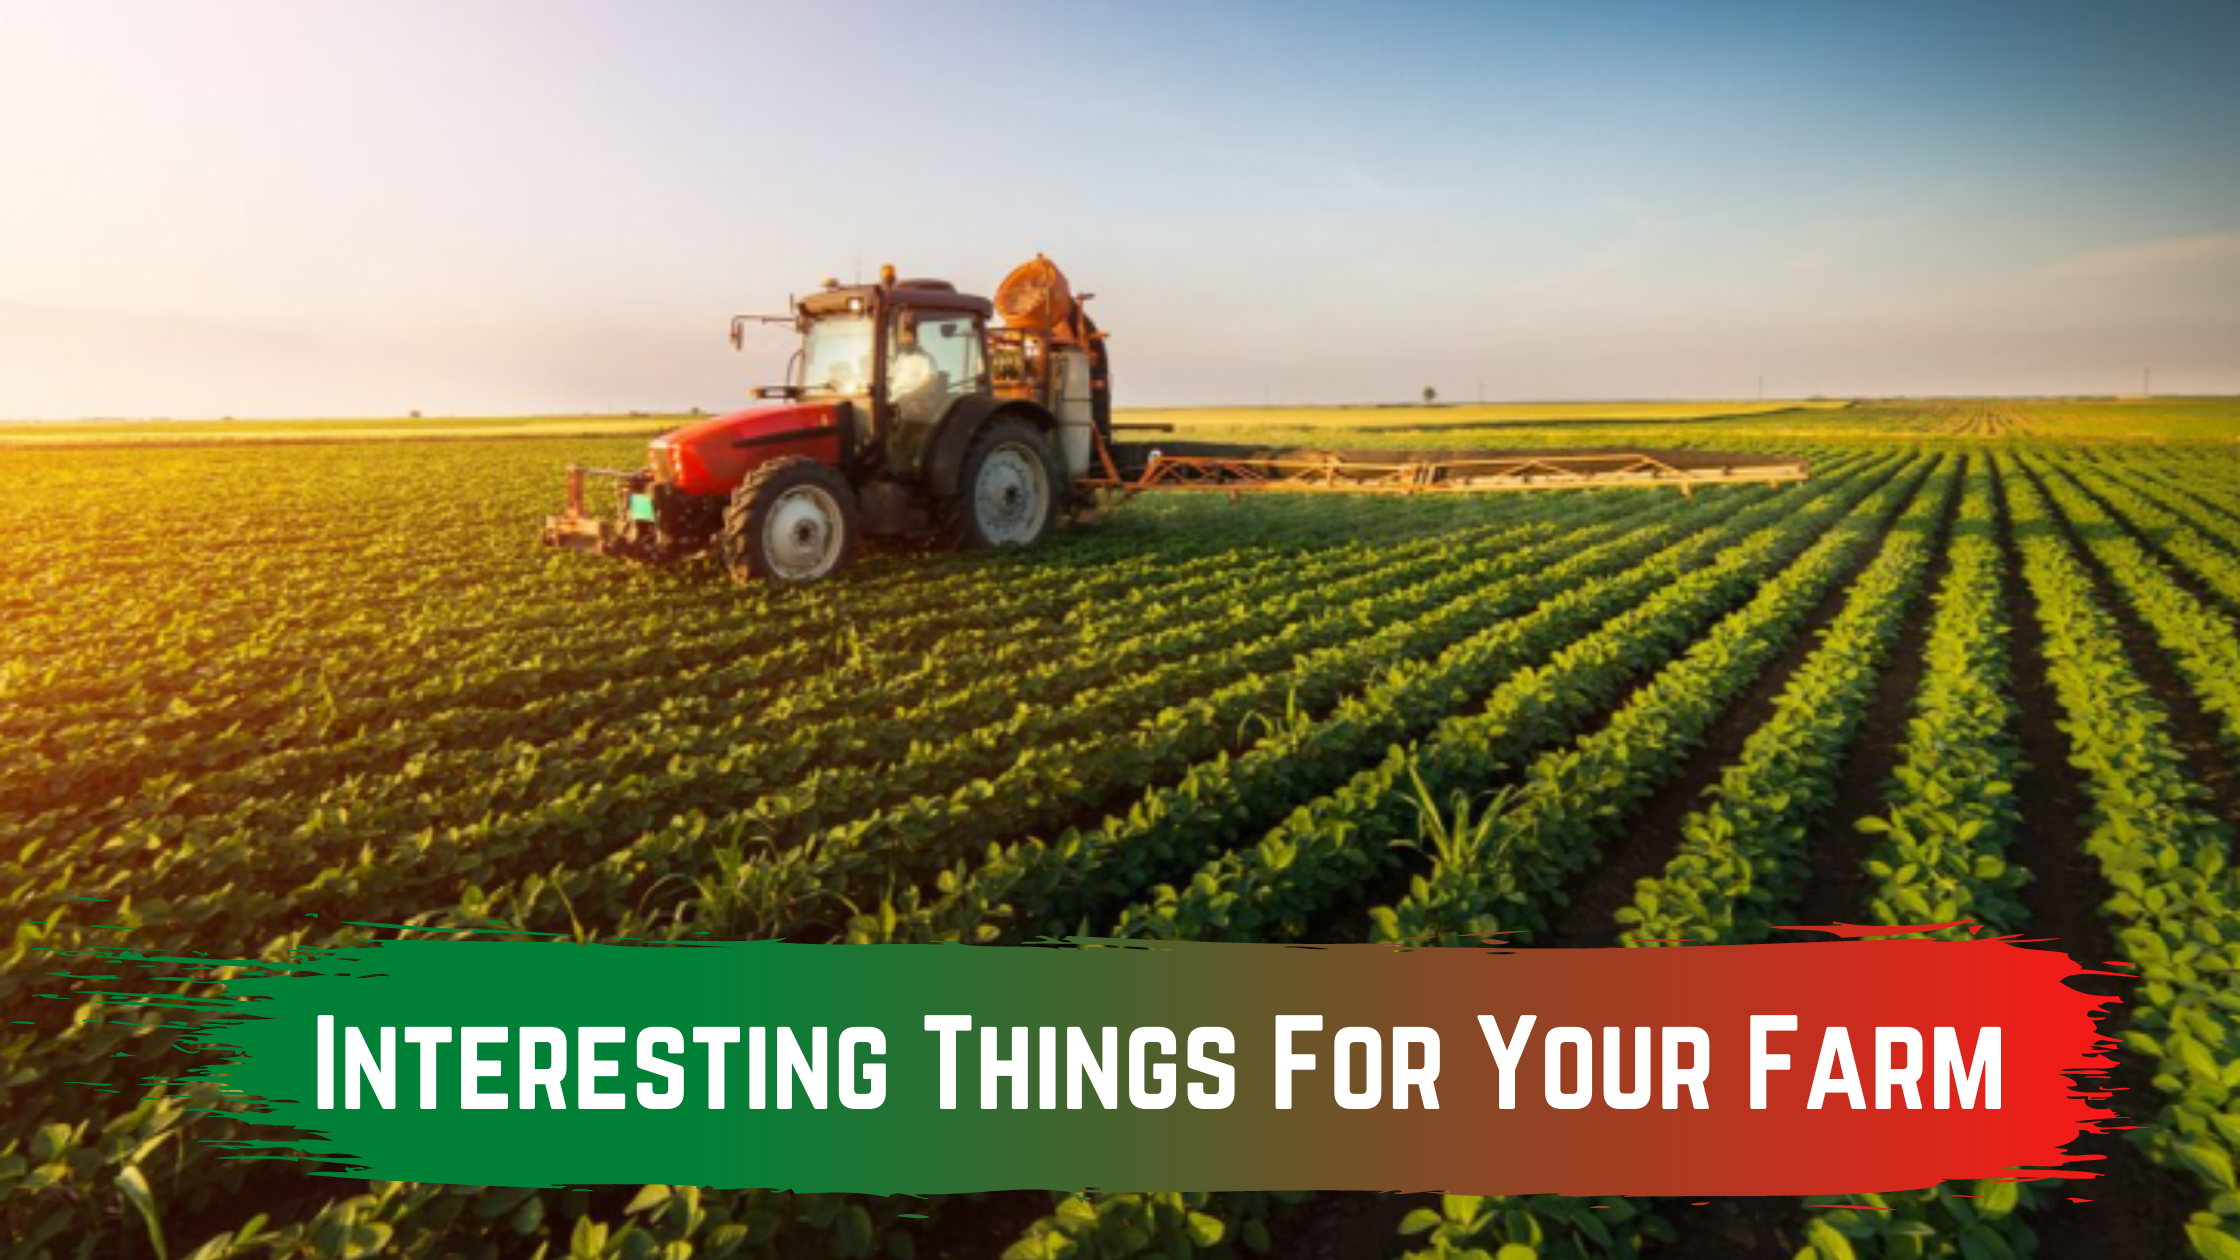 Are You Planning Interesting Things For Your Farm? We Are Here With Top Ideas Just For You